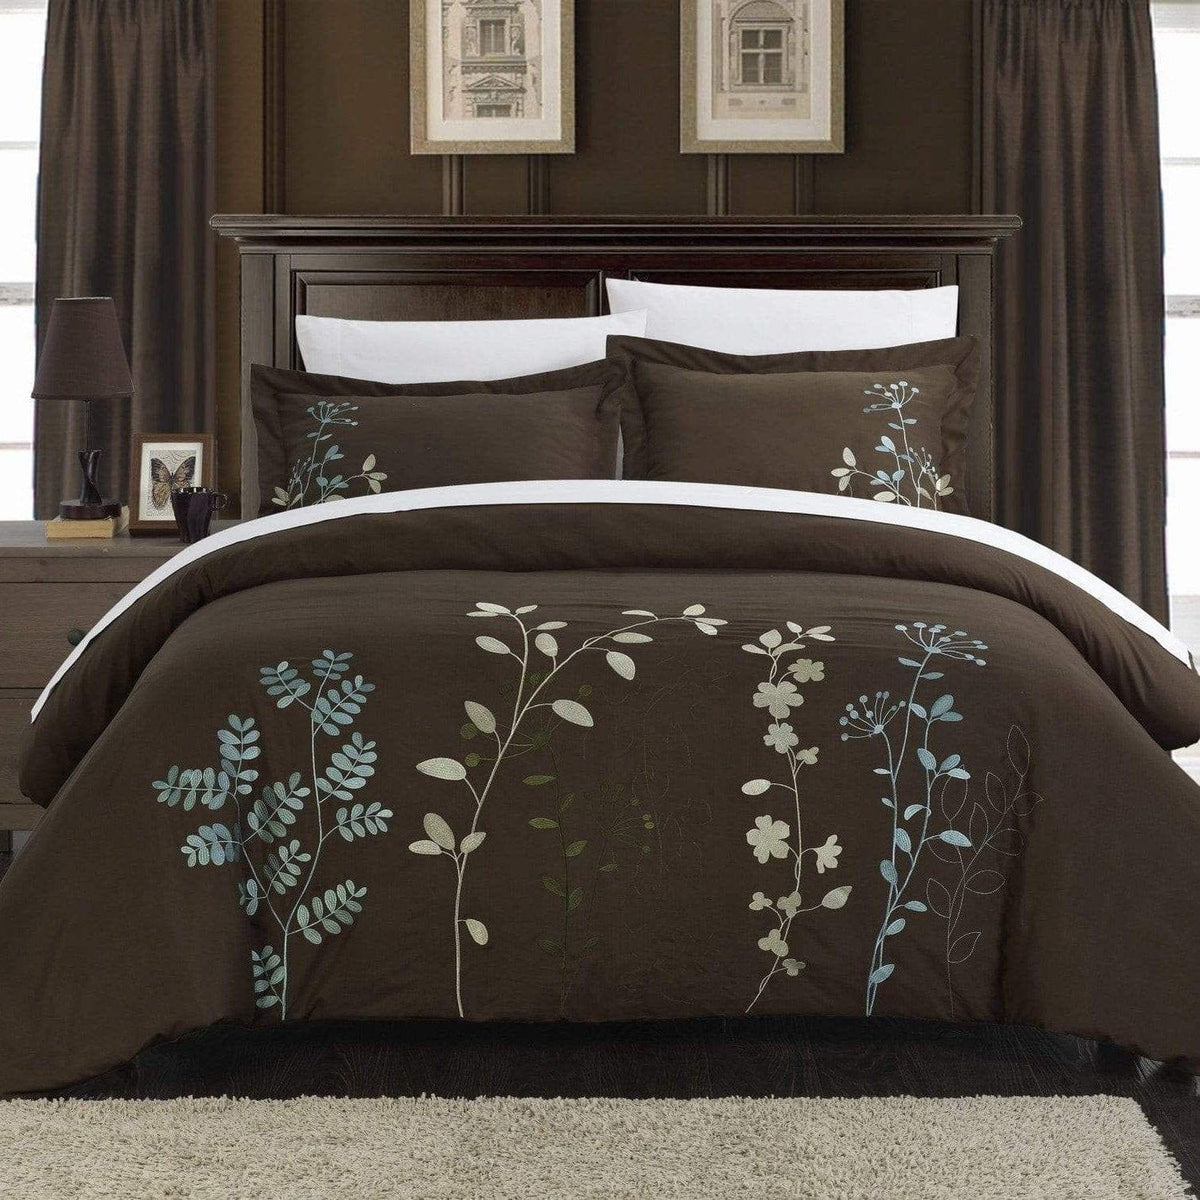 Chic Home Kaylee 3 Piece Floral Duvet Cover Set Brown